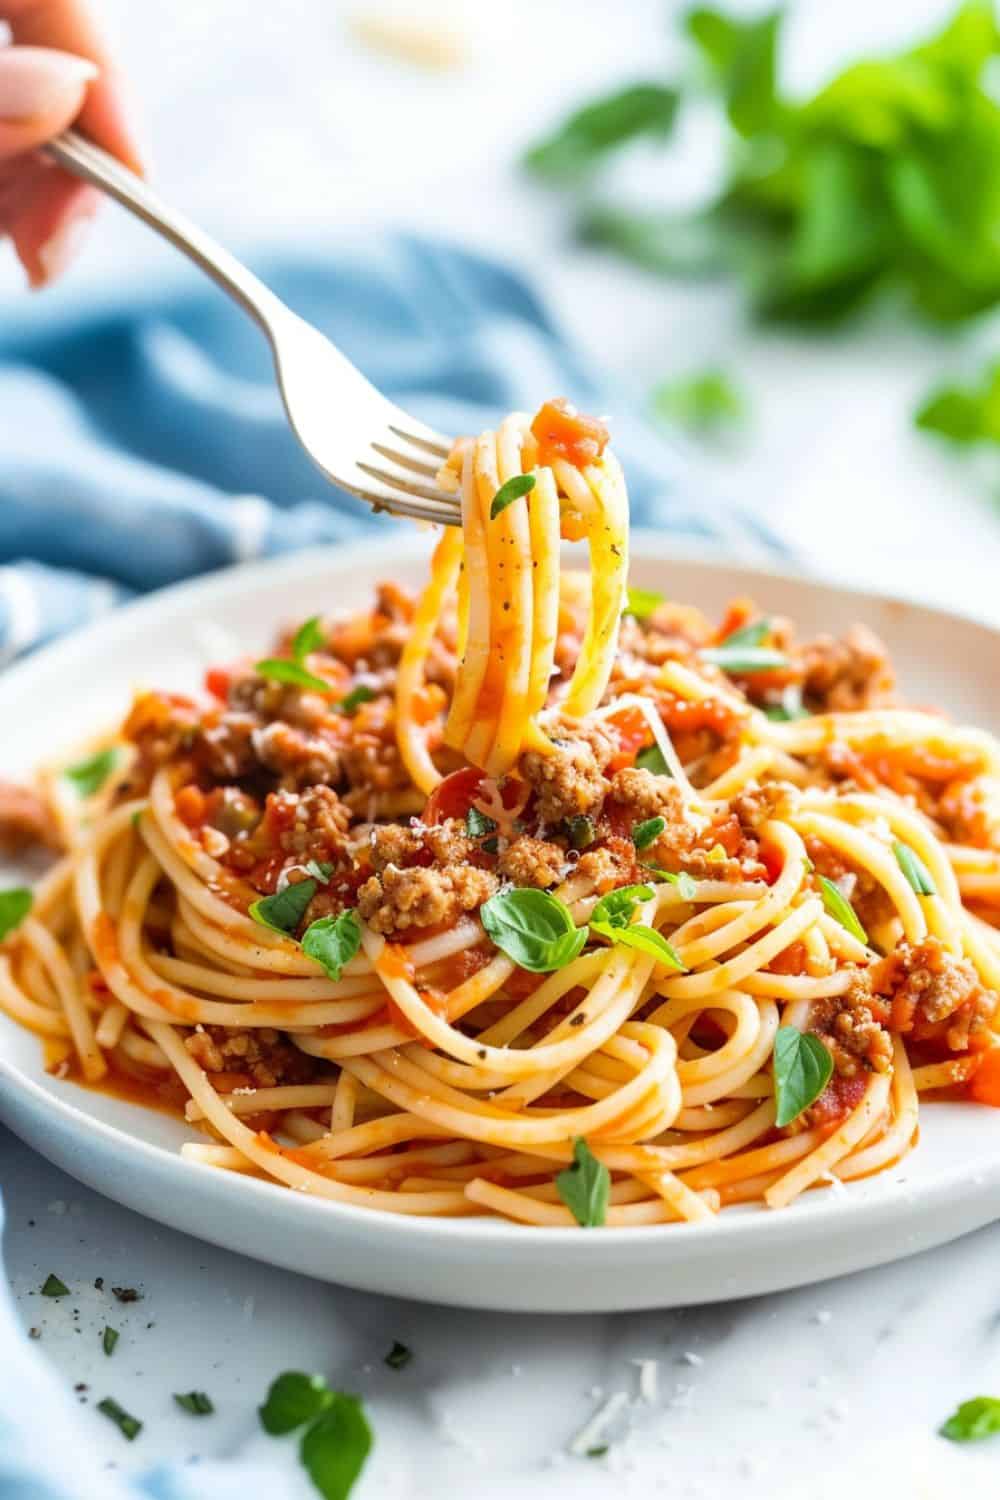 A fork twirling a generous serving of Easy Minced Turkey Spaghetti, highlighting the succulent, finely minced turkey and perfectly cooked spaghetti in a flavorful sauce.